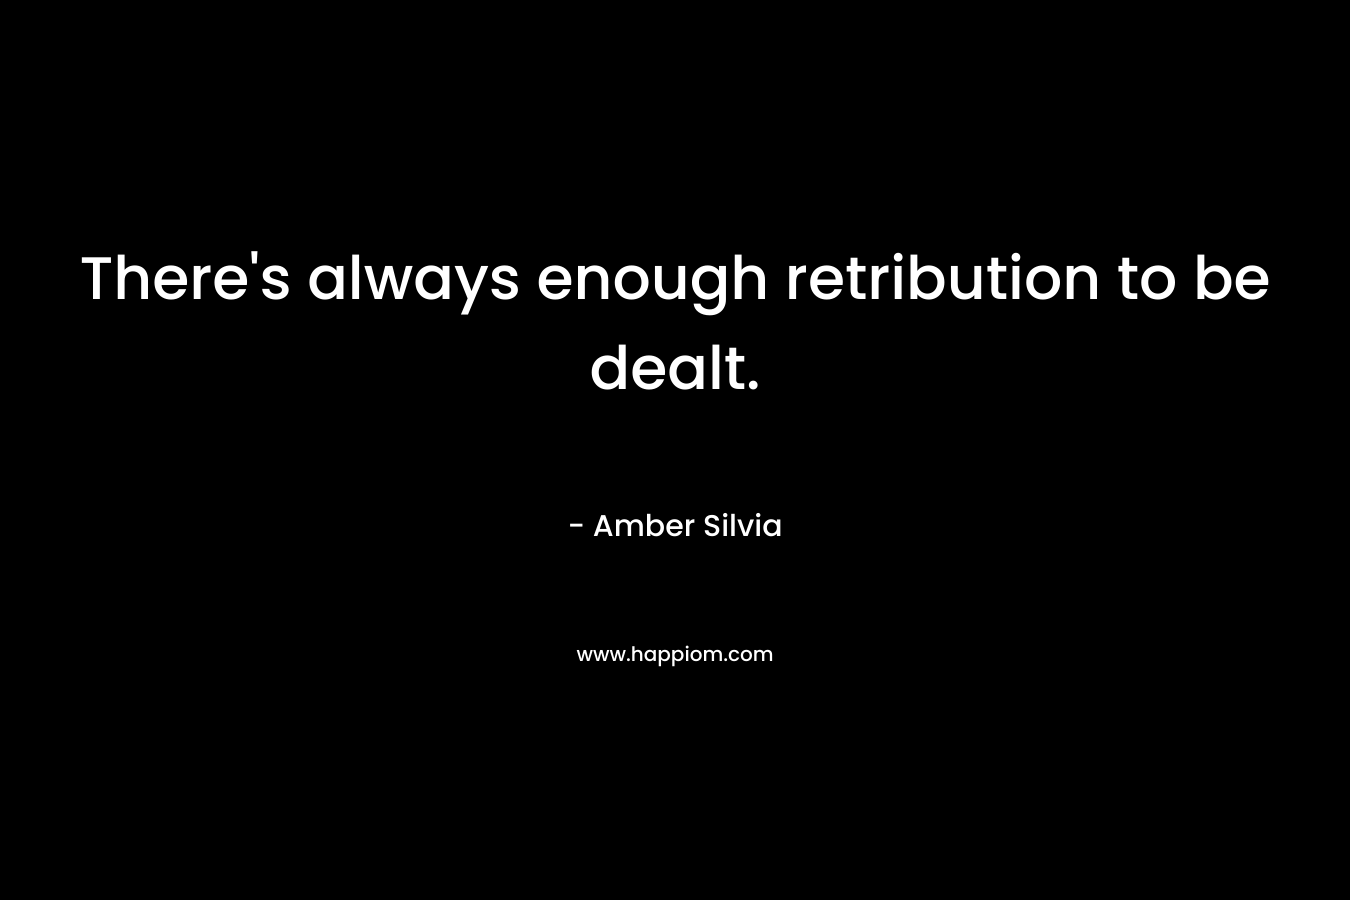 There’s always enough retribution to be dealt. – Amber Silvia